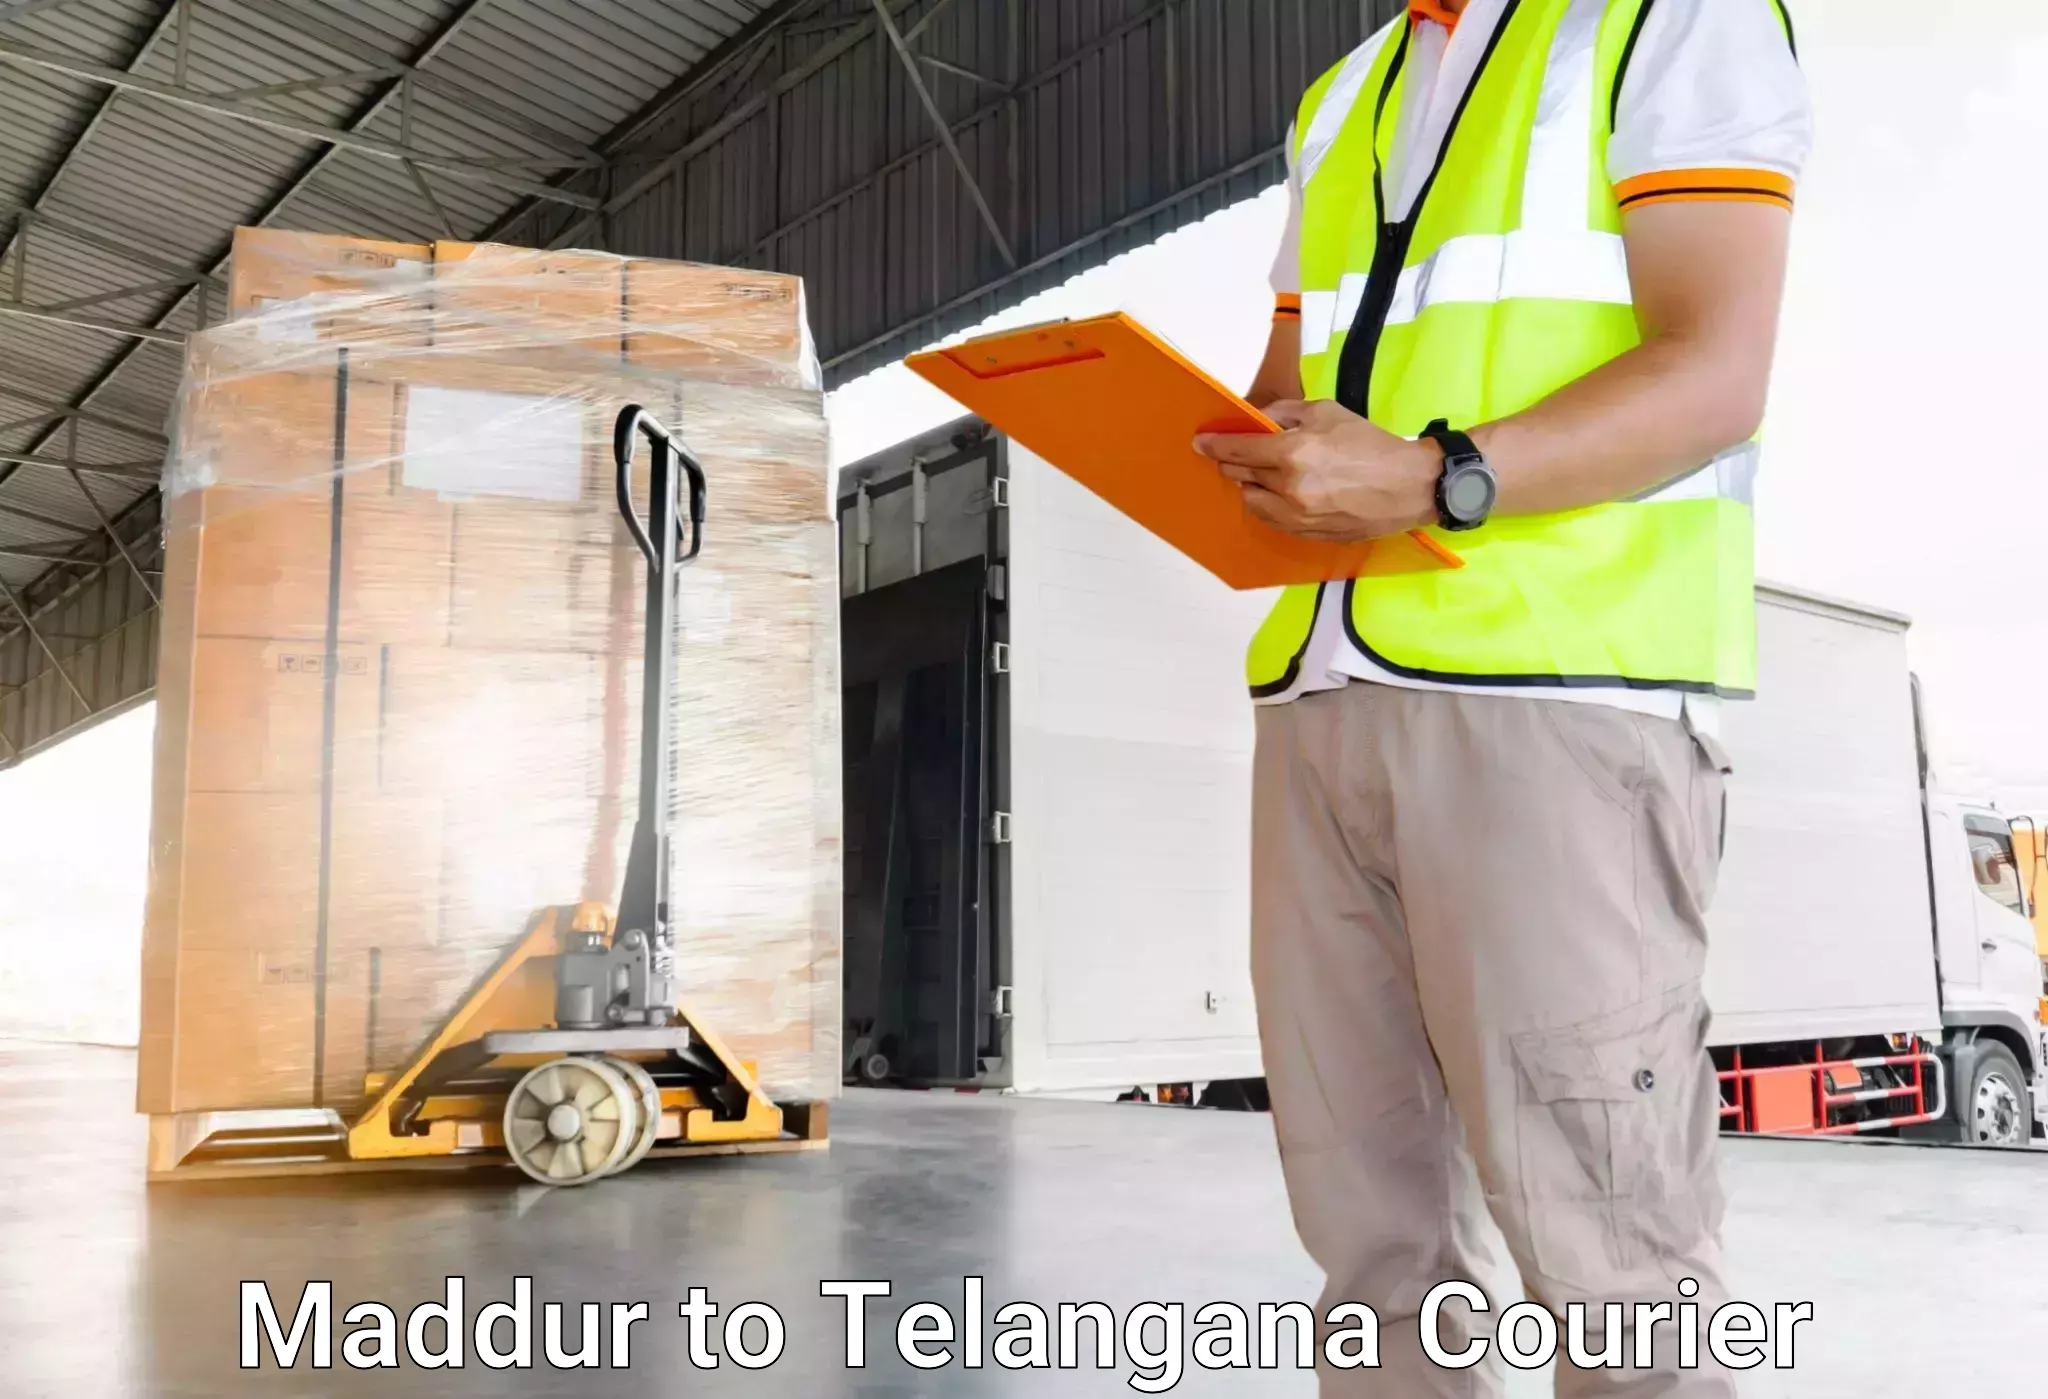 Instant baggage transport quote in Maddur to Vemulawada